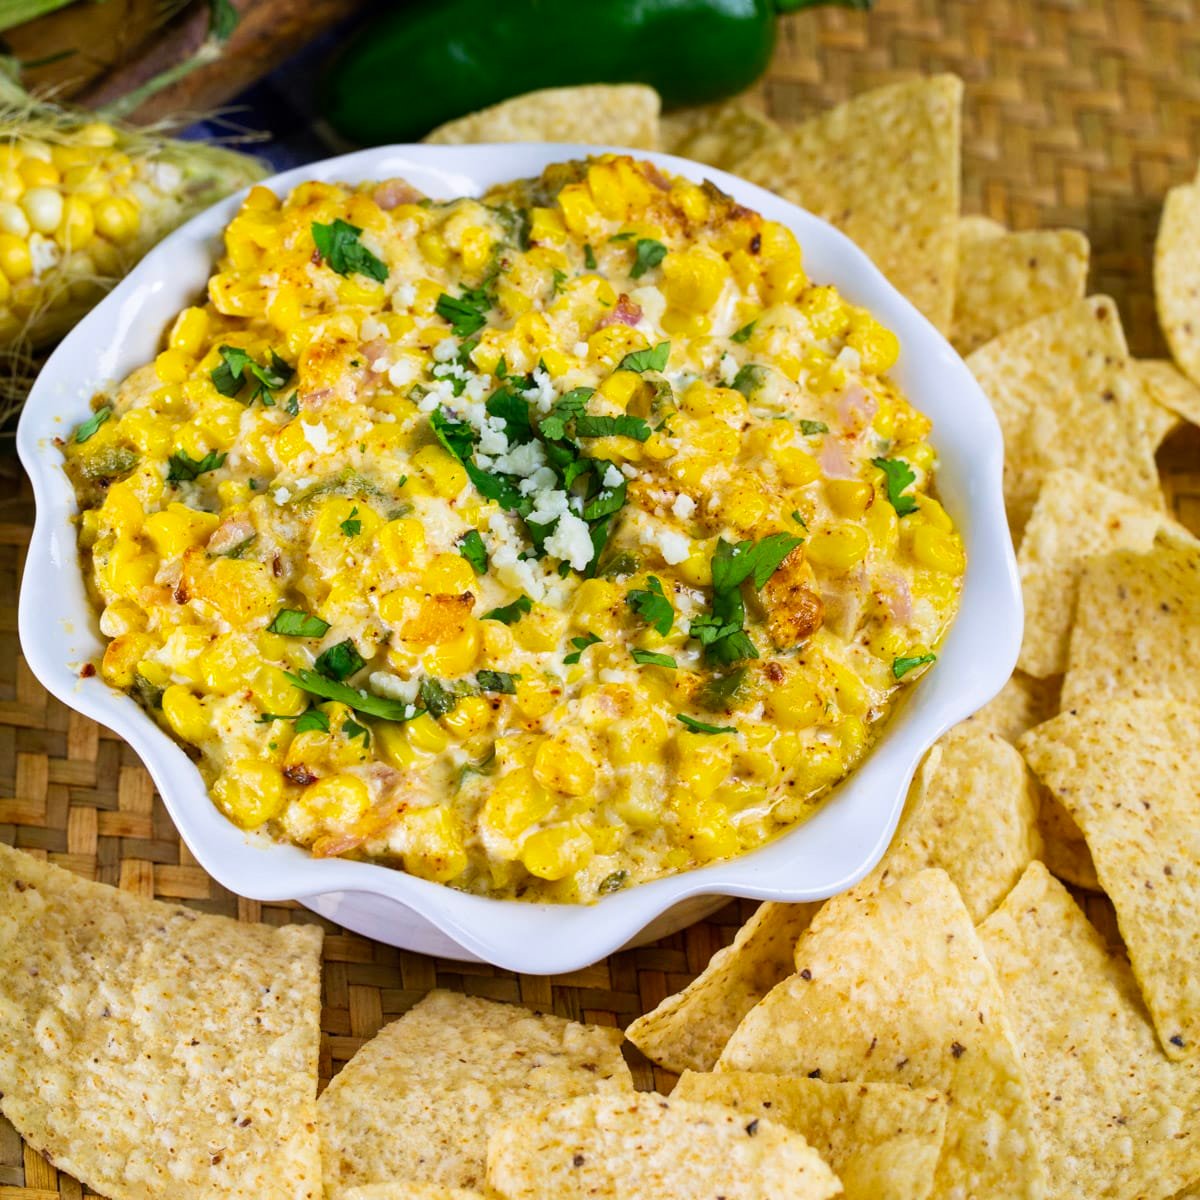 Spicy Mexican Street Corn Dip in a bowl surrounded by tortilla chips.